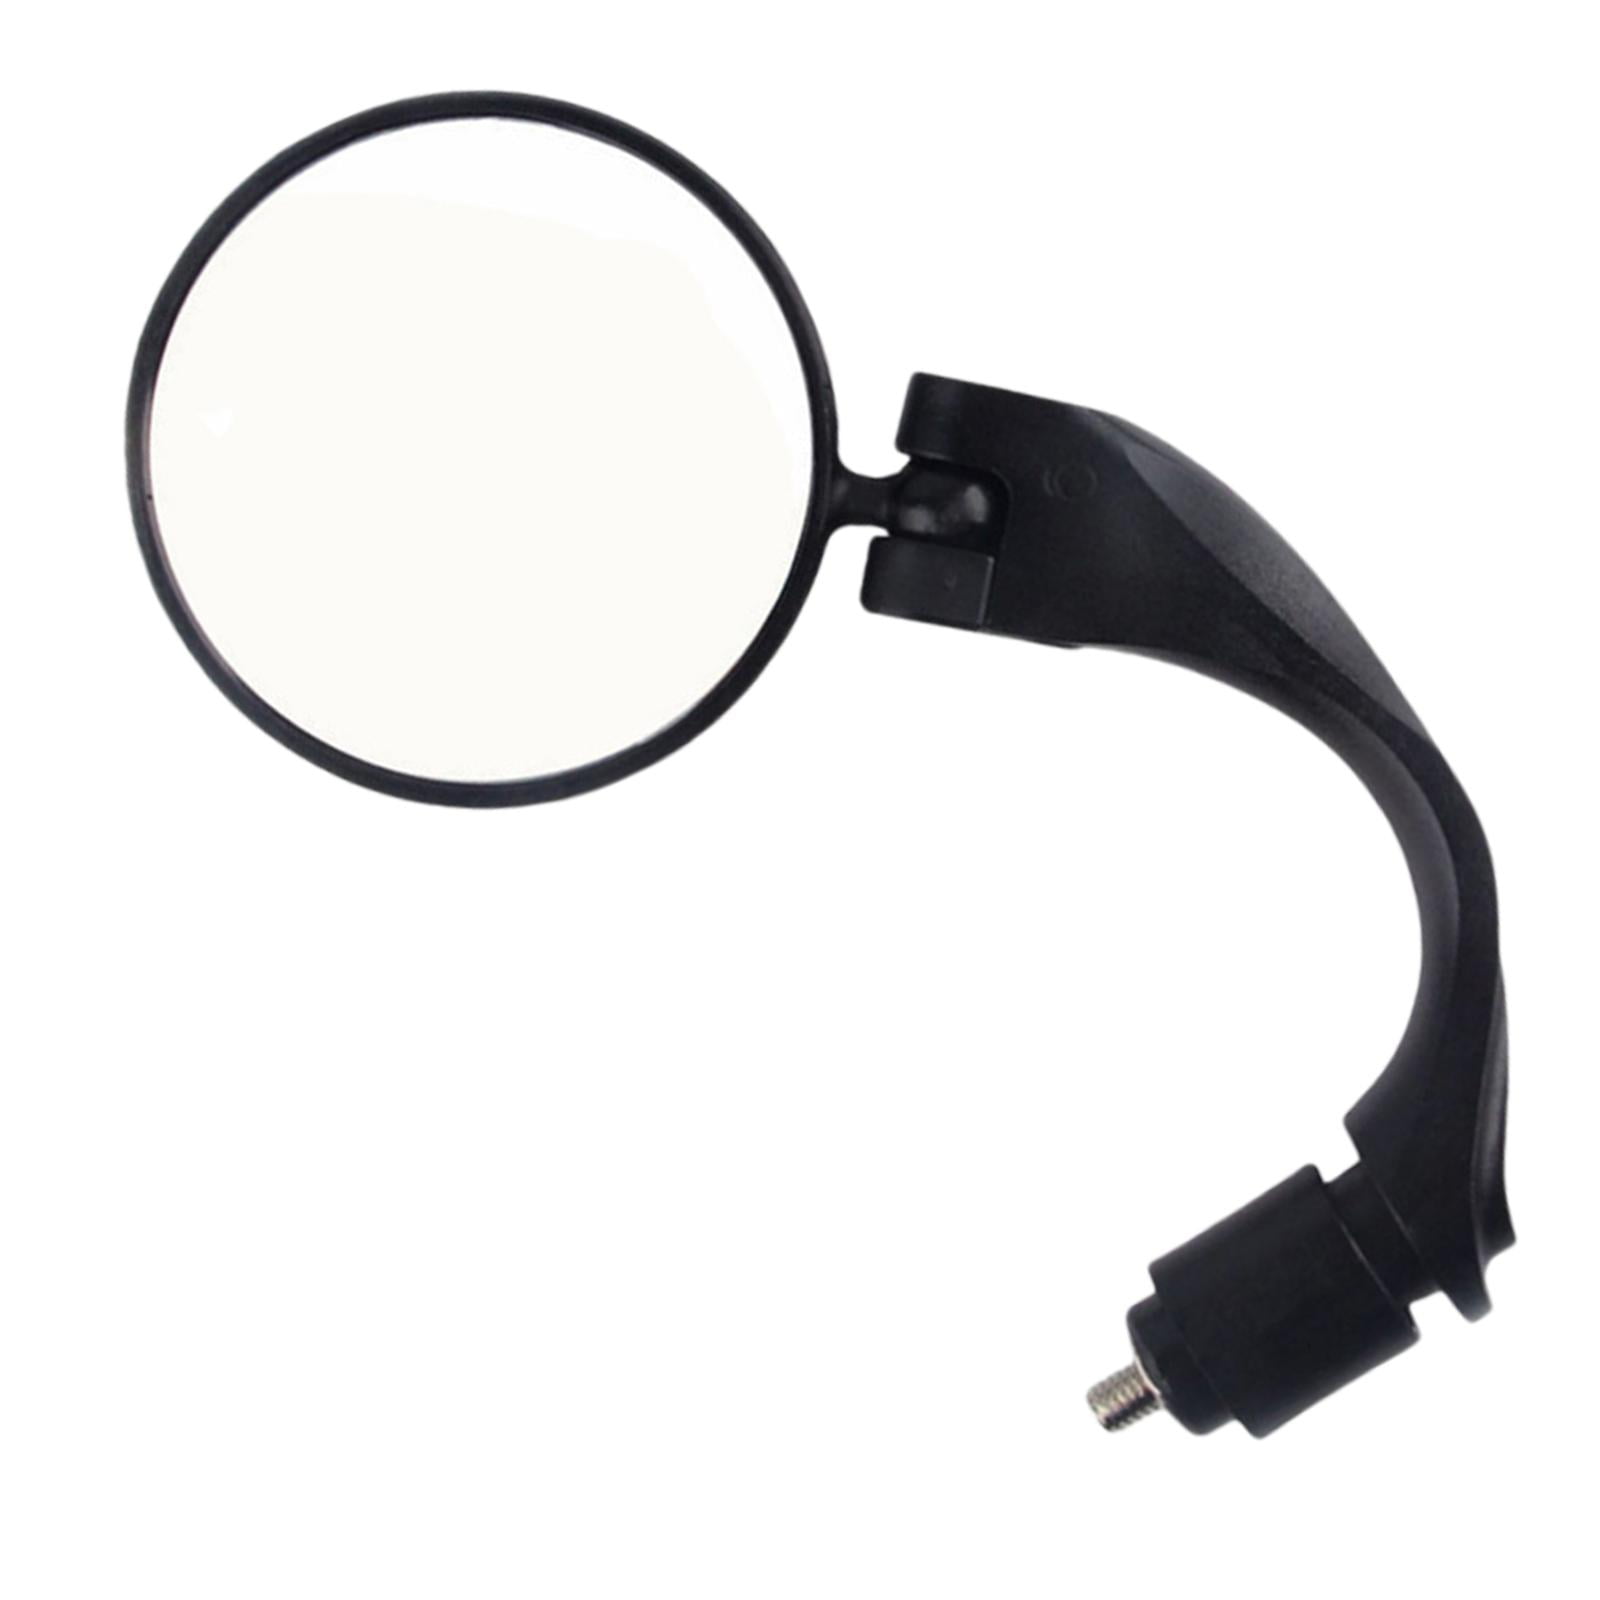 Details about   1PCS Bicycle 22-32mm Handlebar Convex Mirror Bike Rearview Wide Range Back Sight 